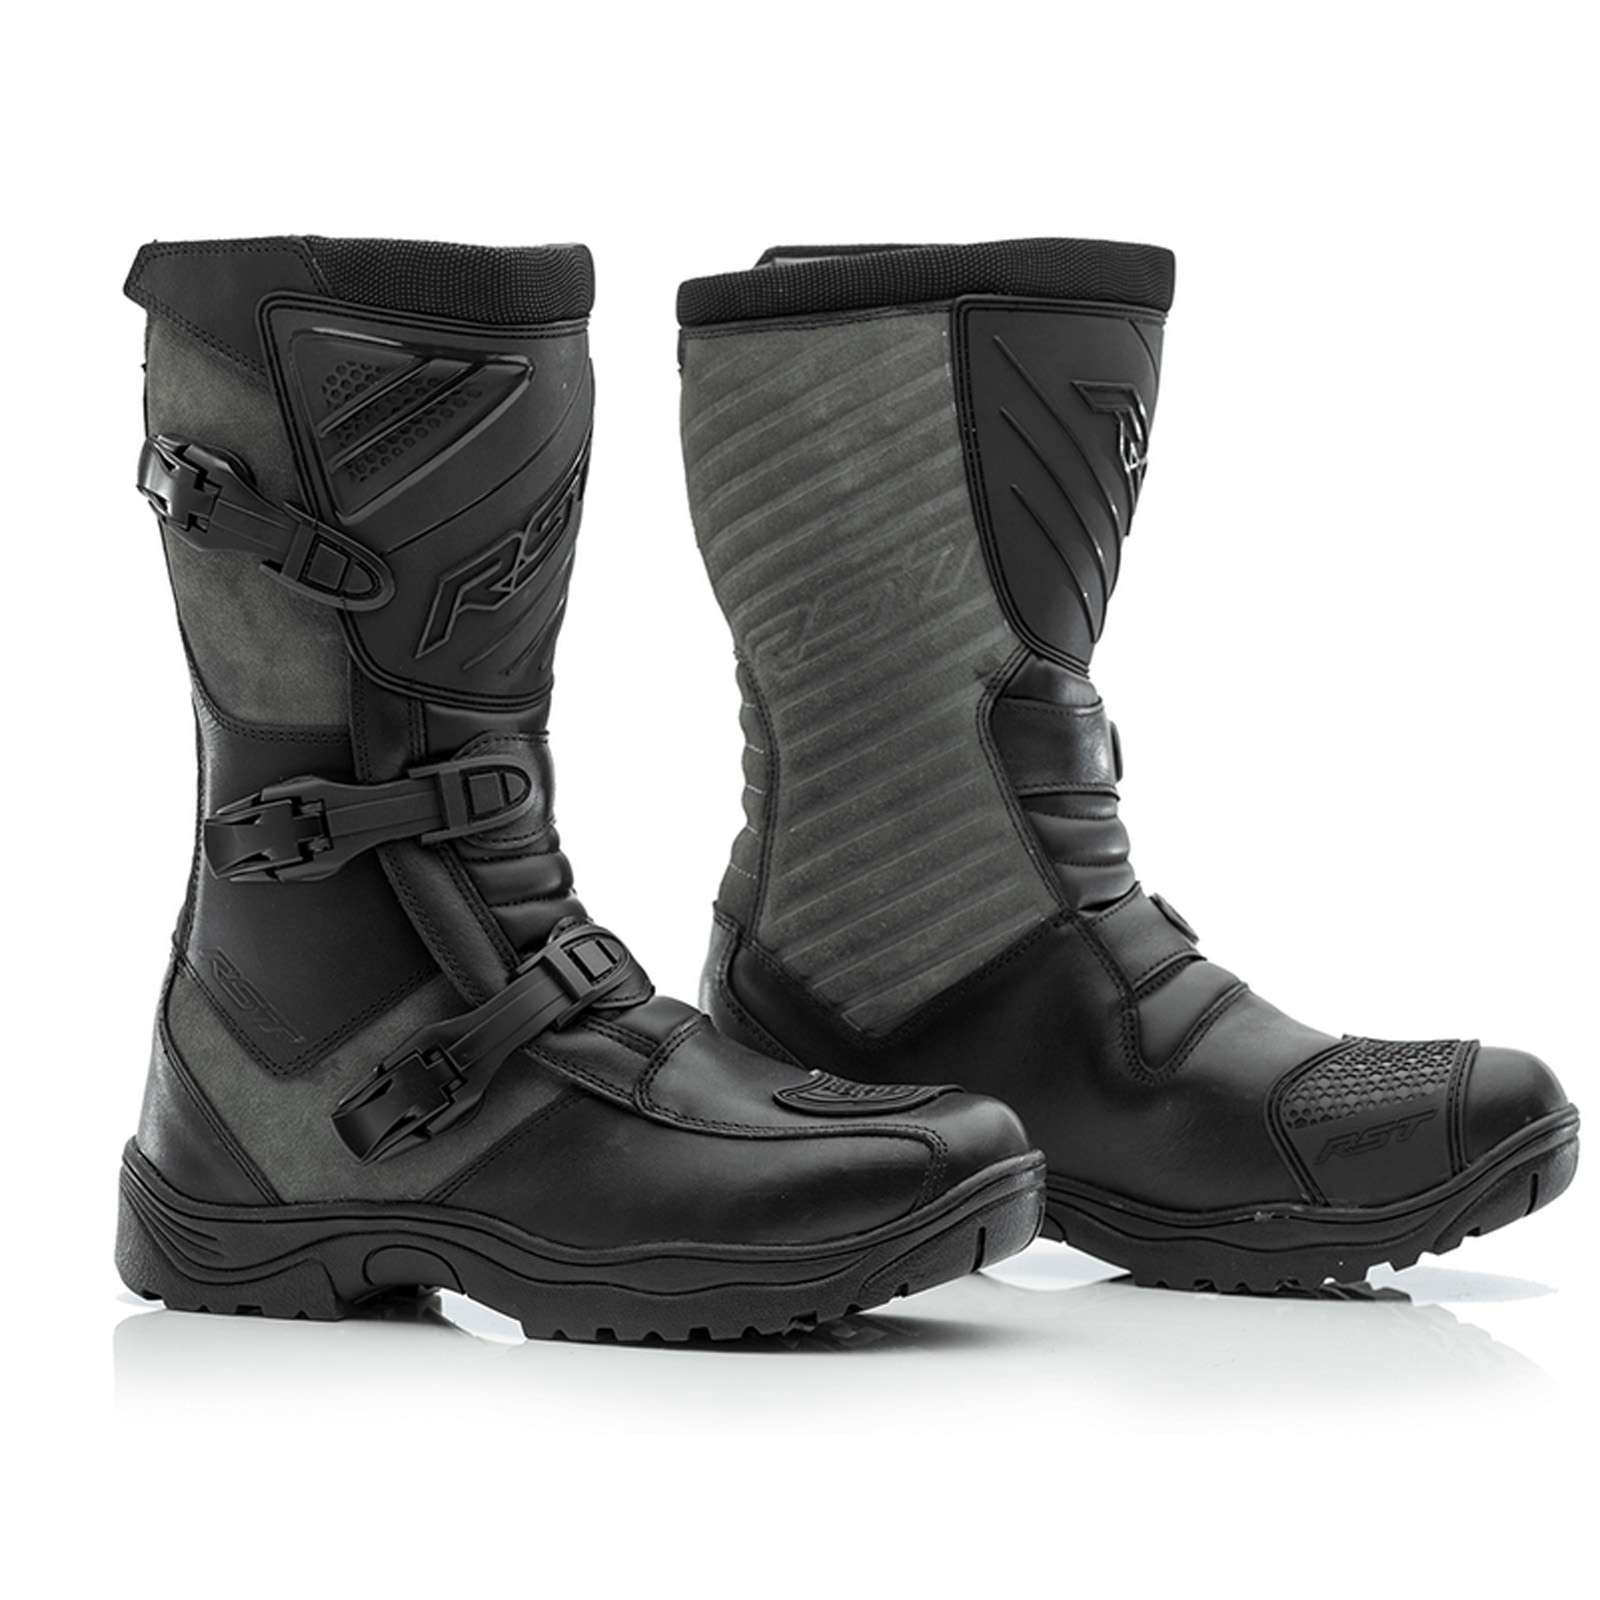 RST Raid Touring Adventure CE Leather Waterproof Motorcycle Boots ...